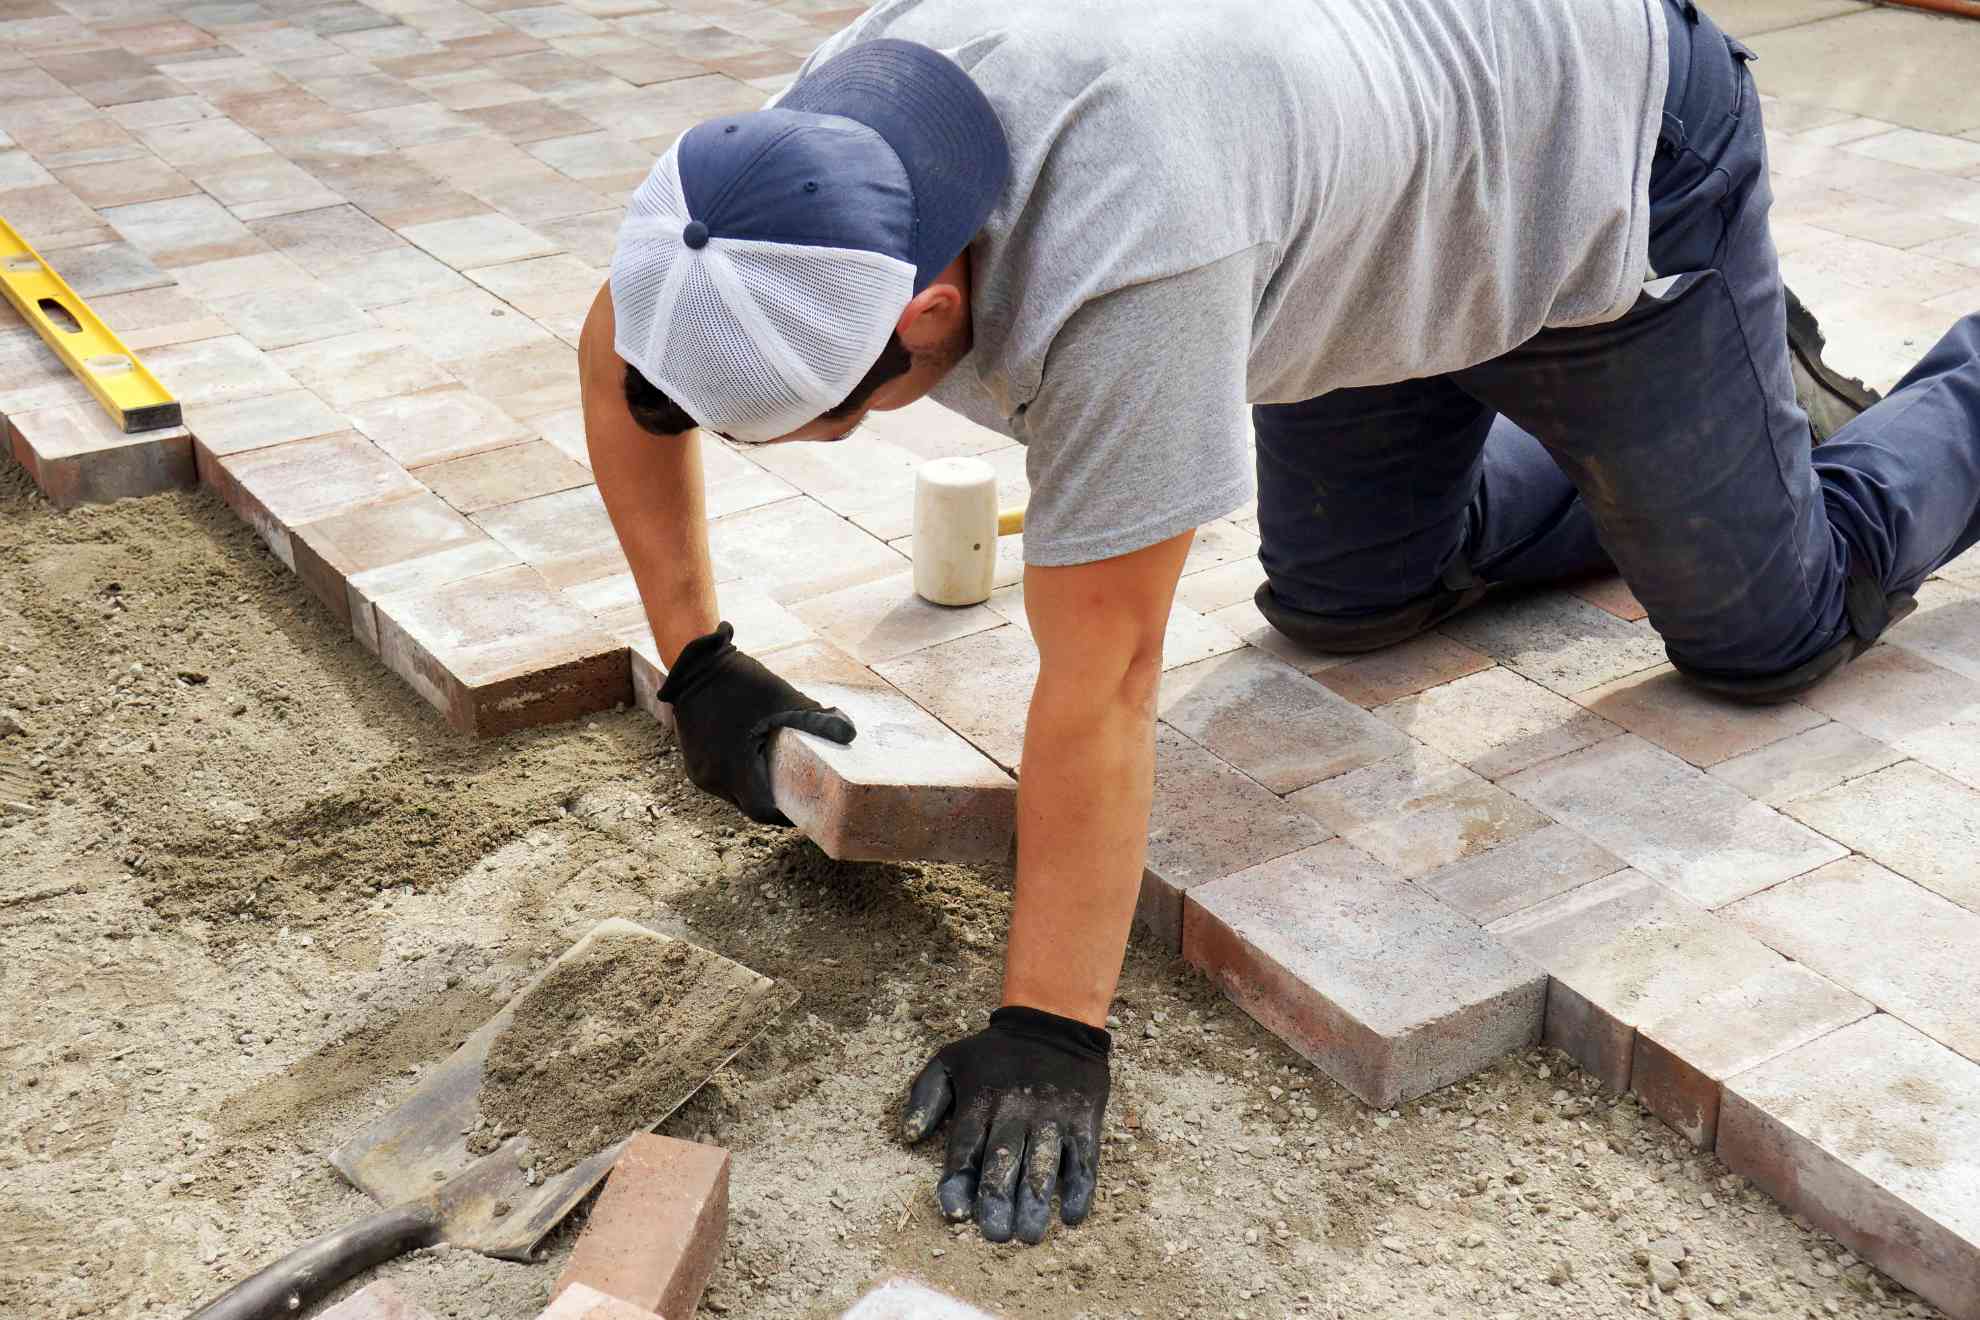 Installing paving bricks or brick pavers takes an expert touch and attention to detail. The commercial paving contractor 3-D Paving has decades of experience installing commercial pavers and brick driveways. Call the experts today!